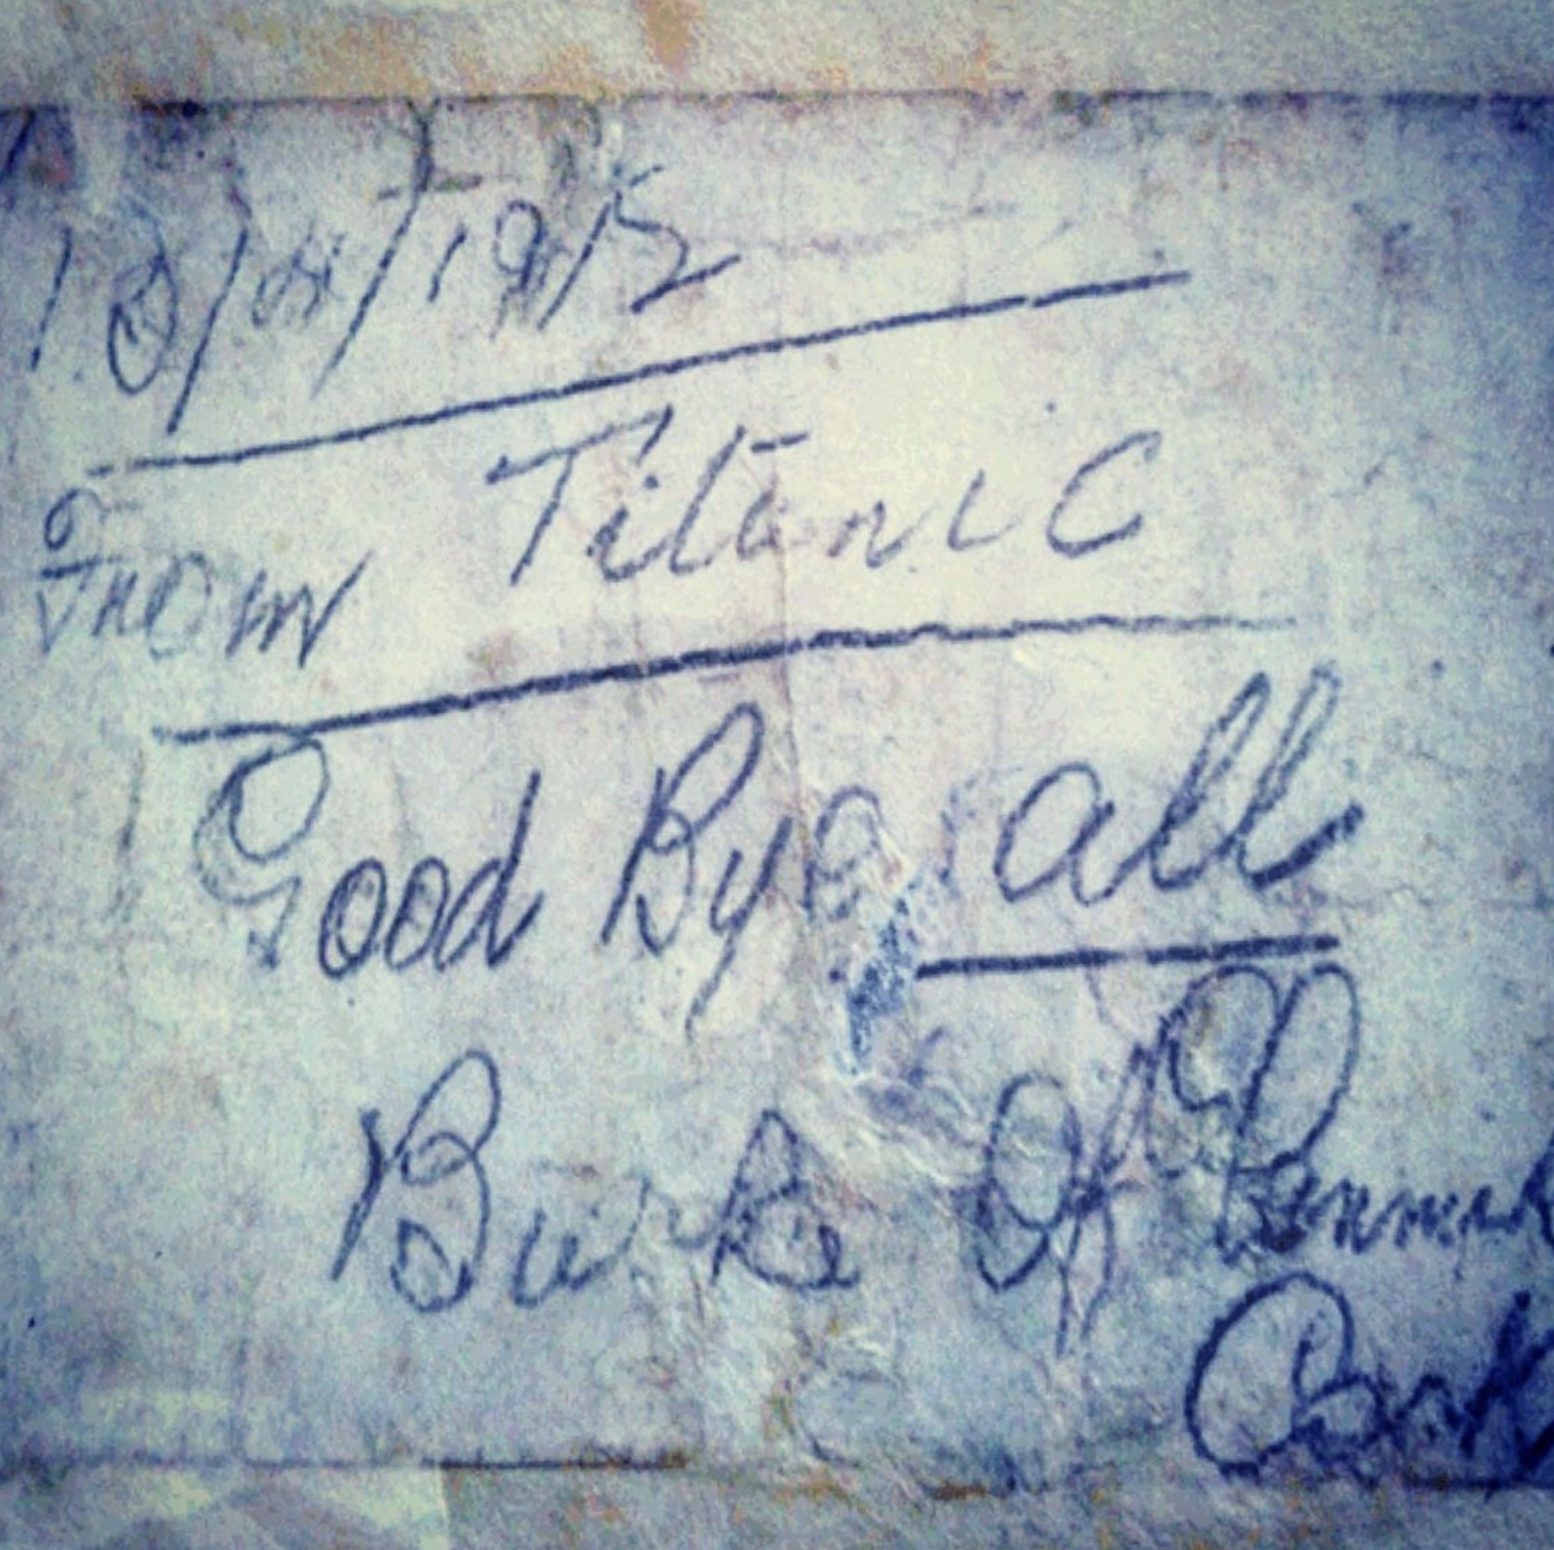 A photograph of a faded out note written in dark ink, the note says: From Titanic, Good Bye all. The note is signed Jeremiah Burke.